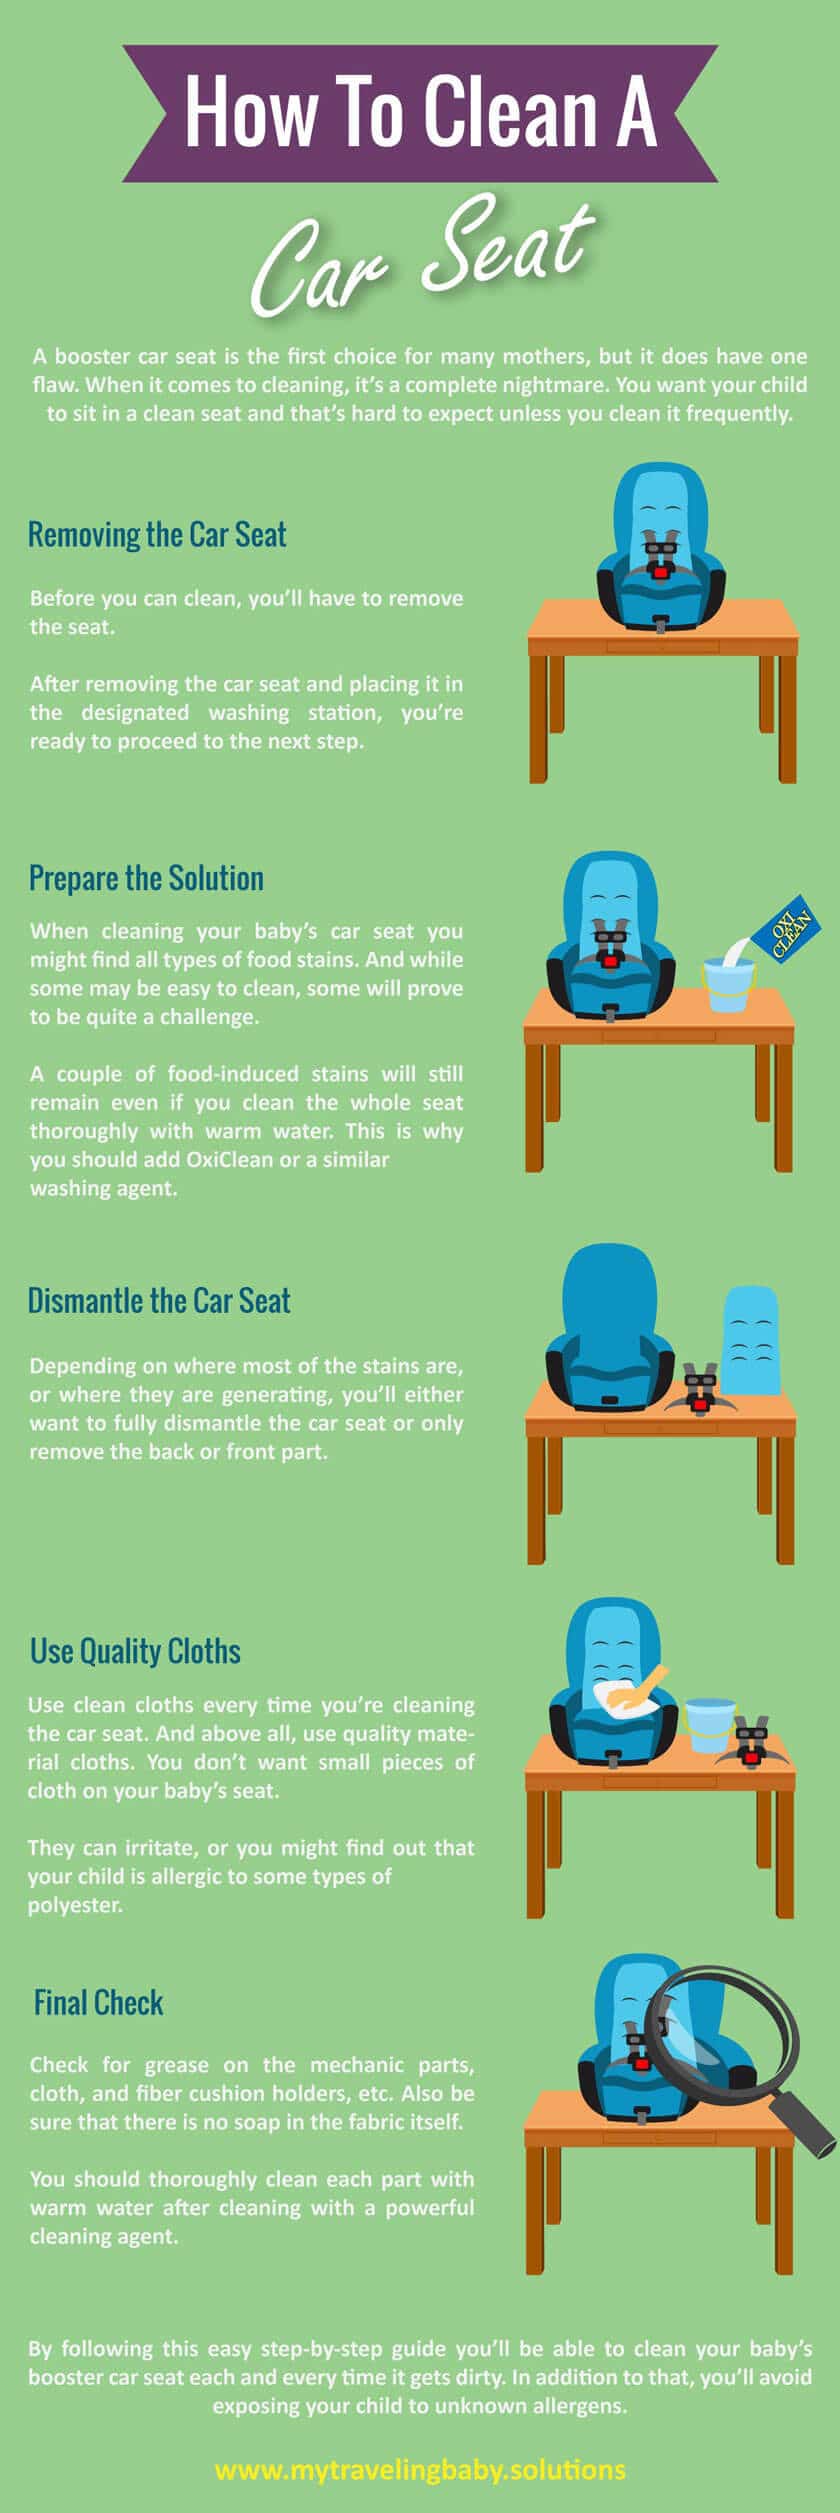 How to Clean a Car Seat Infographic